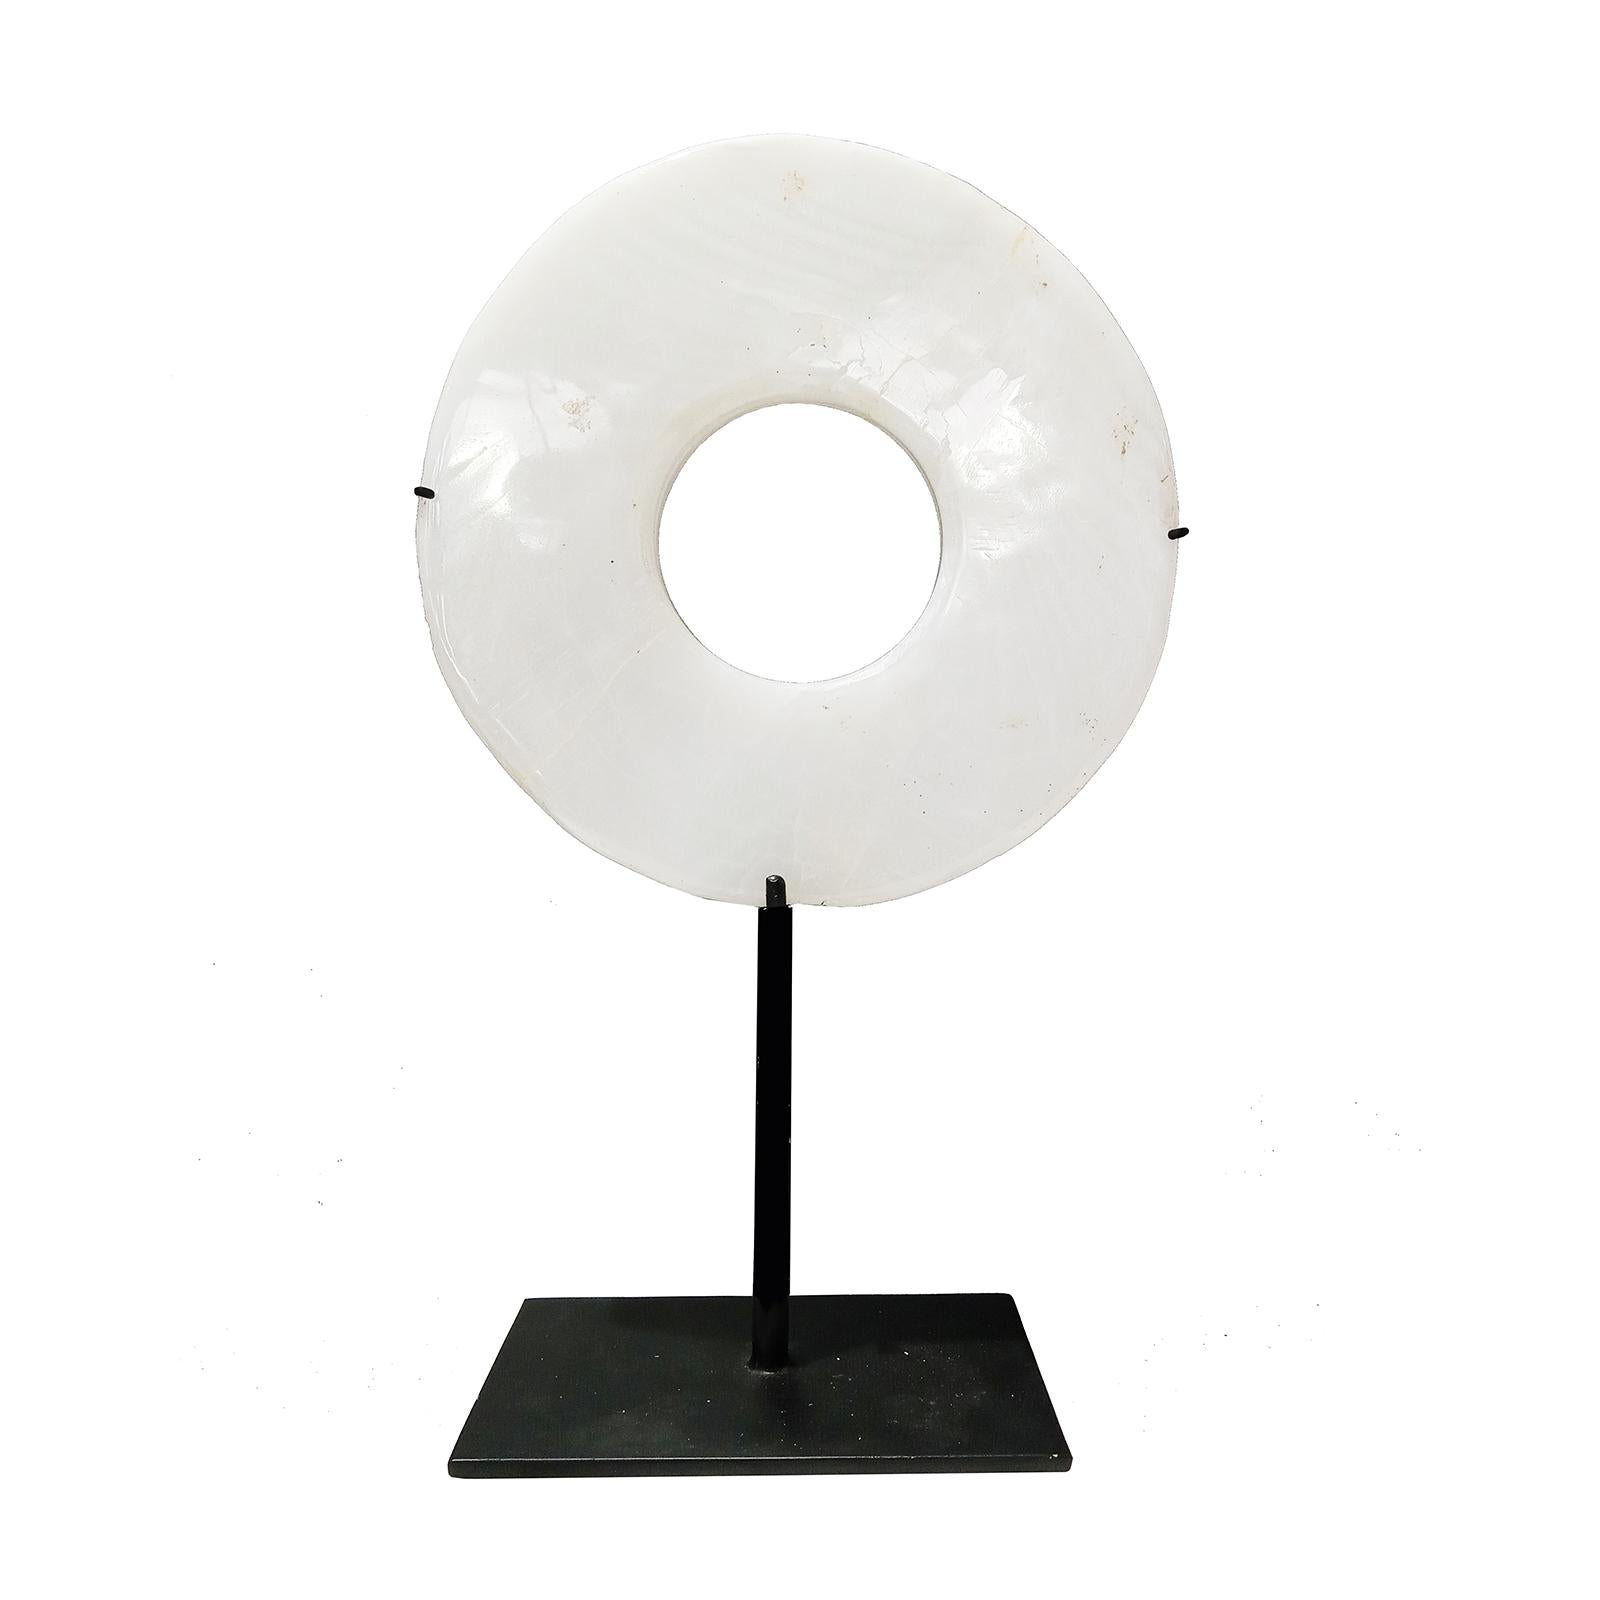 A beautiful stone disk, hand-carved in Indonesia. Mounted on a black metal stand. White stone, polished and shaped to resemble marble.

6.75 inches diameter, 2.75 inches deep (stand base), 11 inches total height (mounted). 


